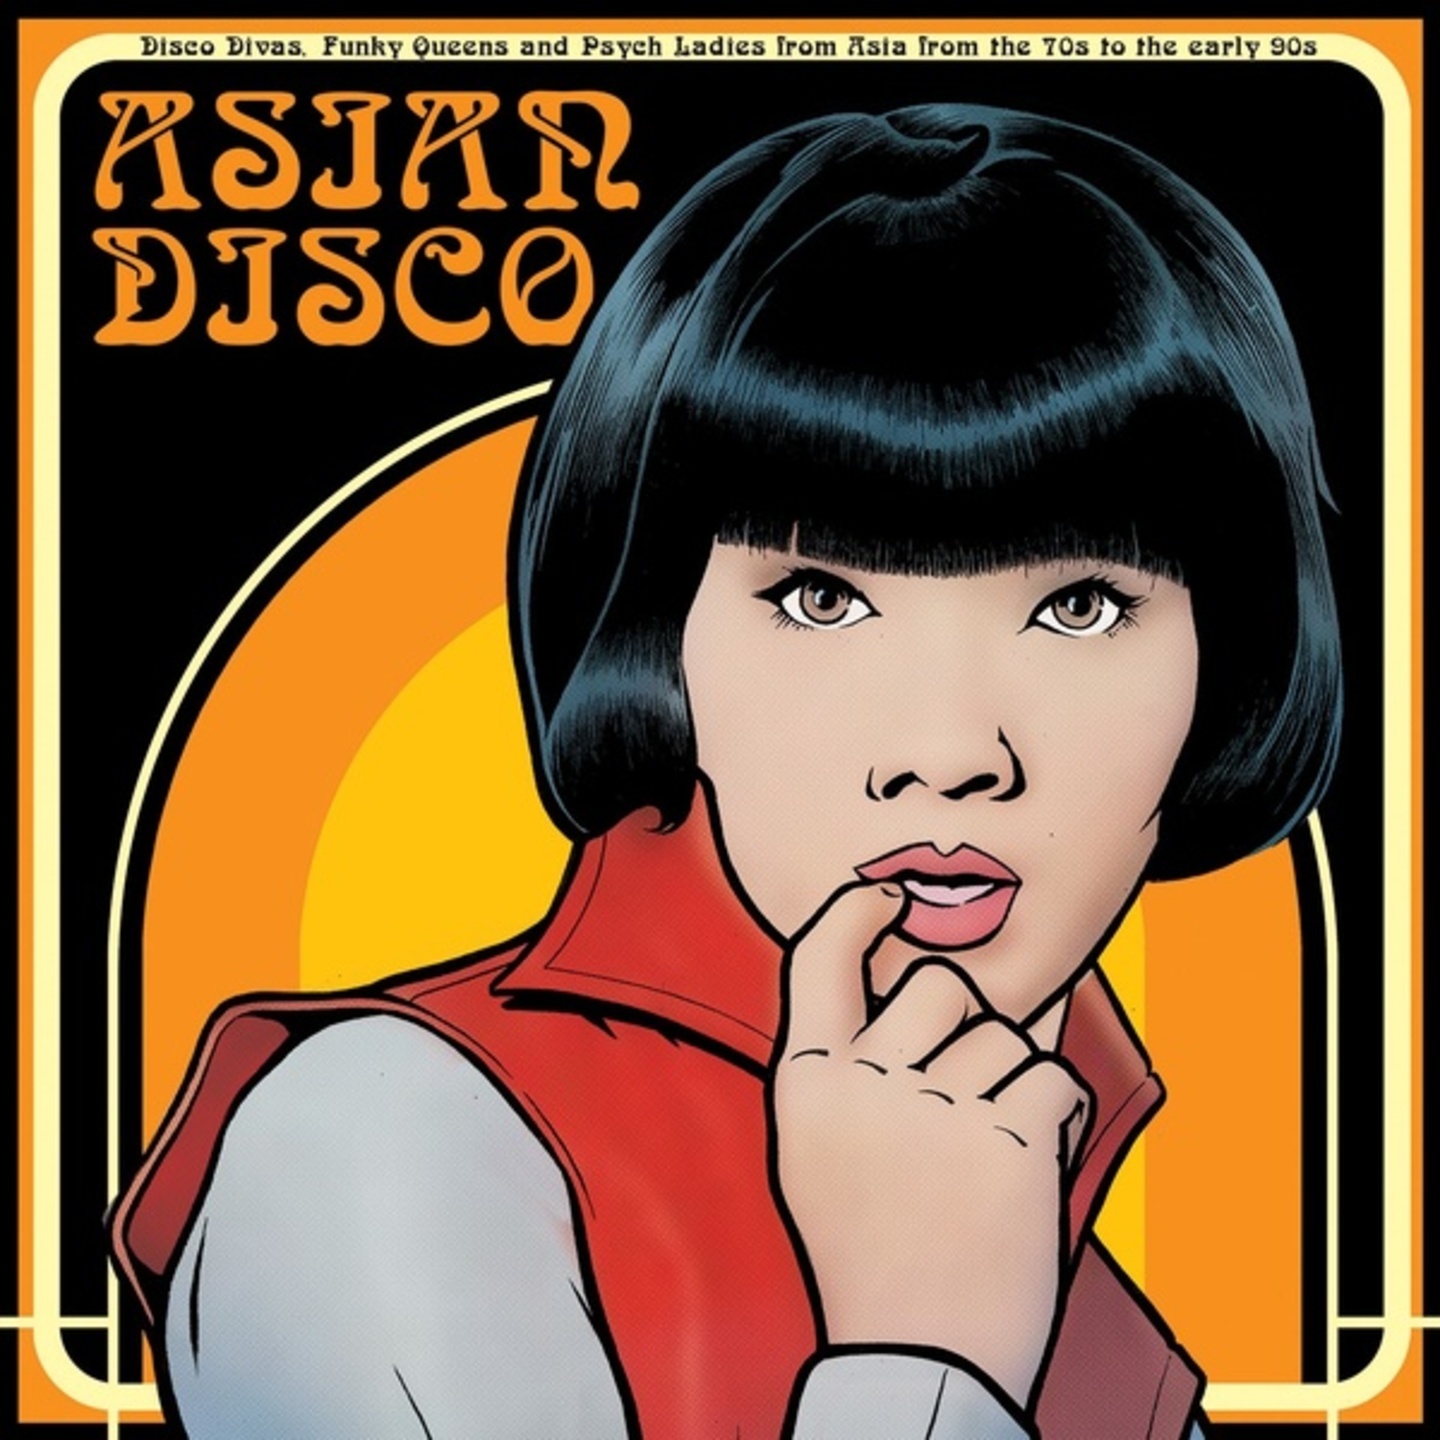 VA - Asian Disco Disco Divas, Funky Queens and Psych Ladies from Asia from the 70s to the Early 90s LP